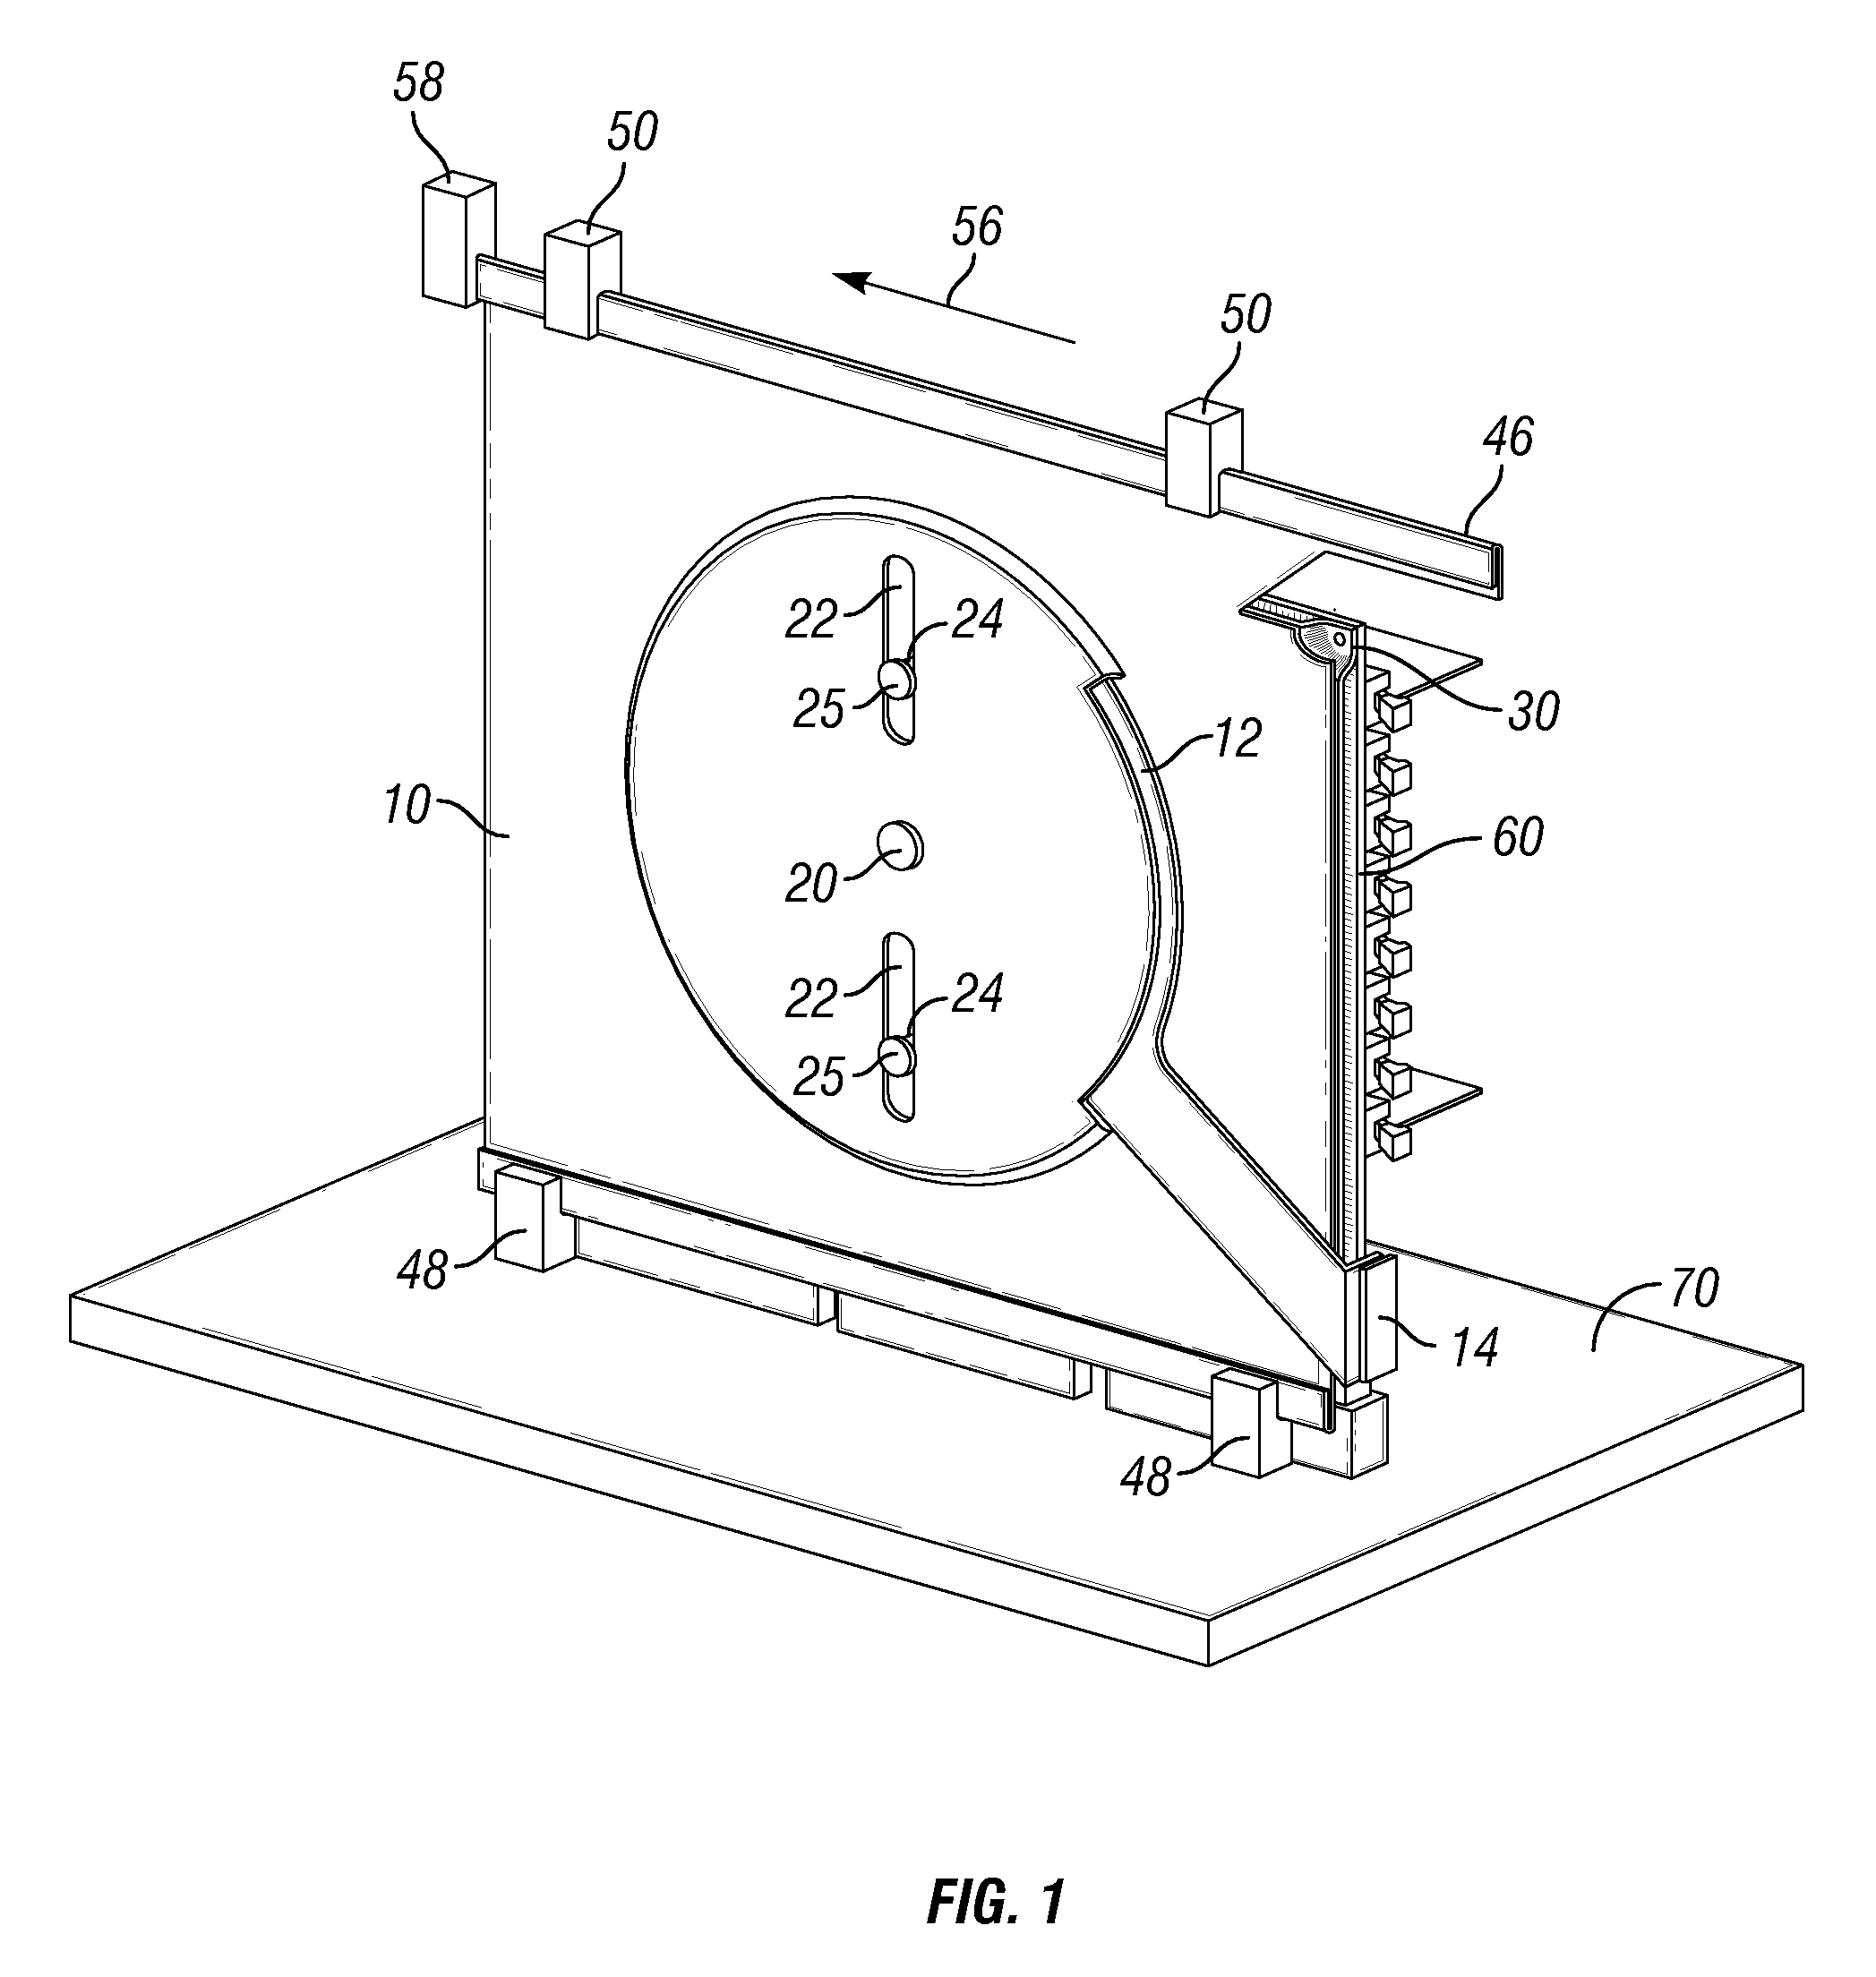 Apparatus for docking a printed circuit board